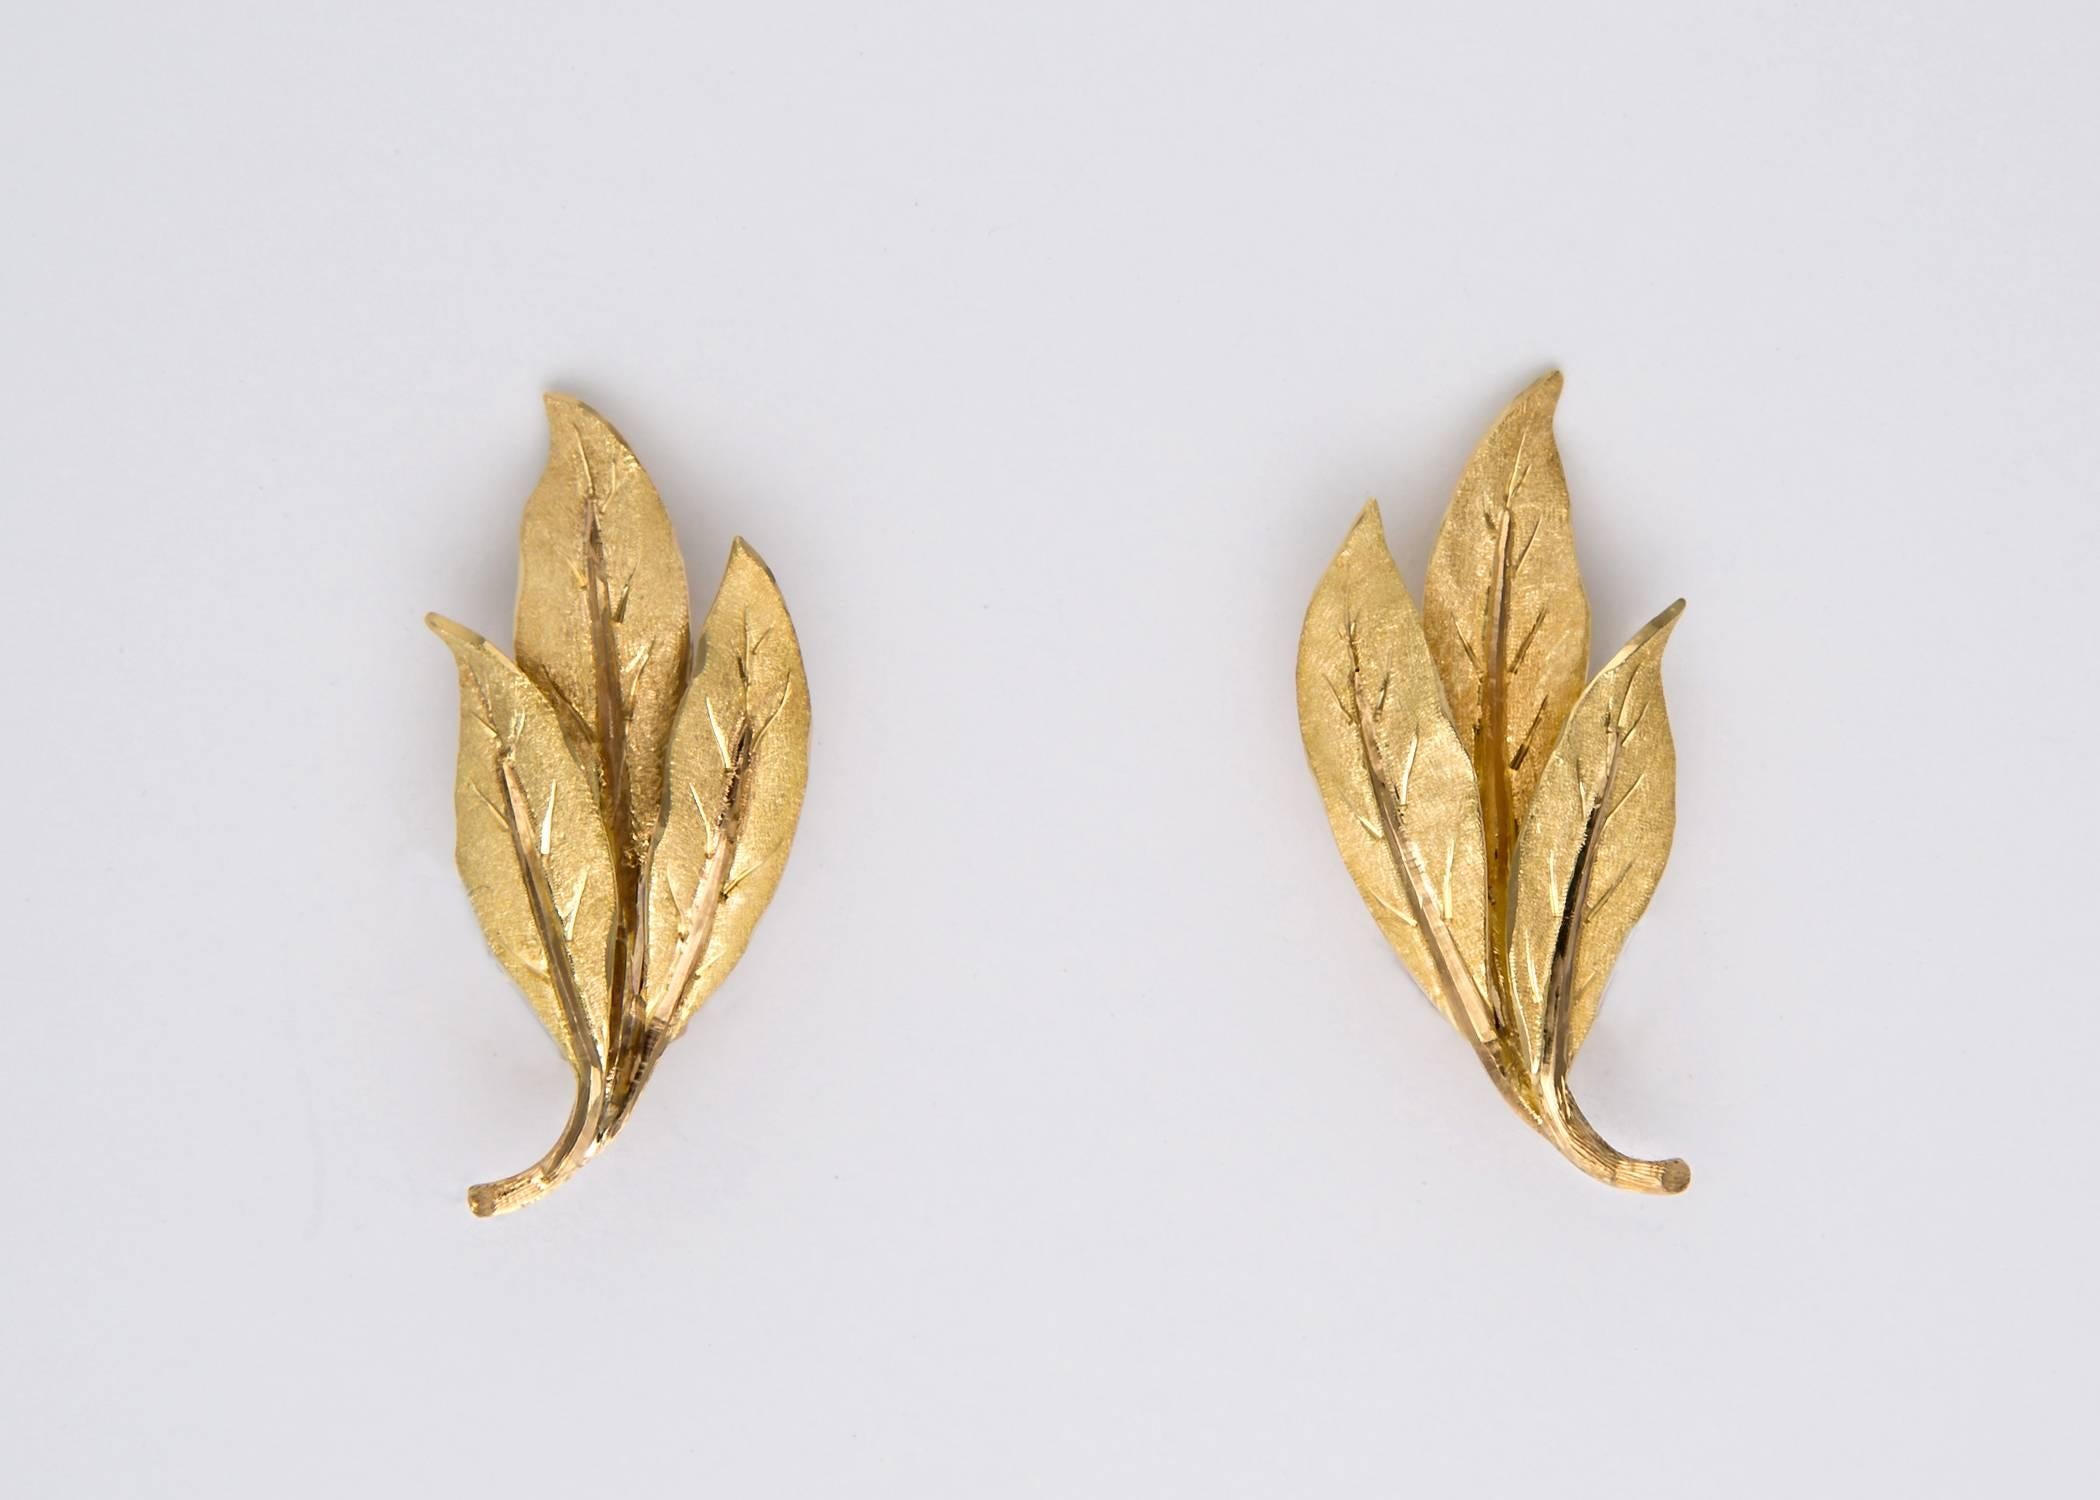 Vintage Buccellati triple leaf earrings.  1 1/8 inches in length.  A classic wearable design. 